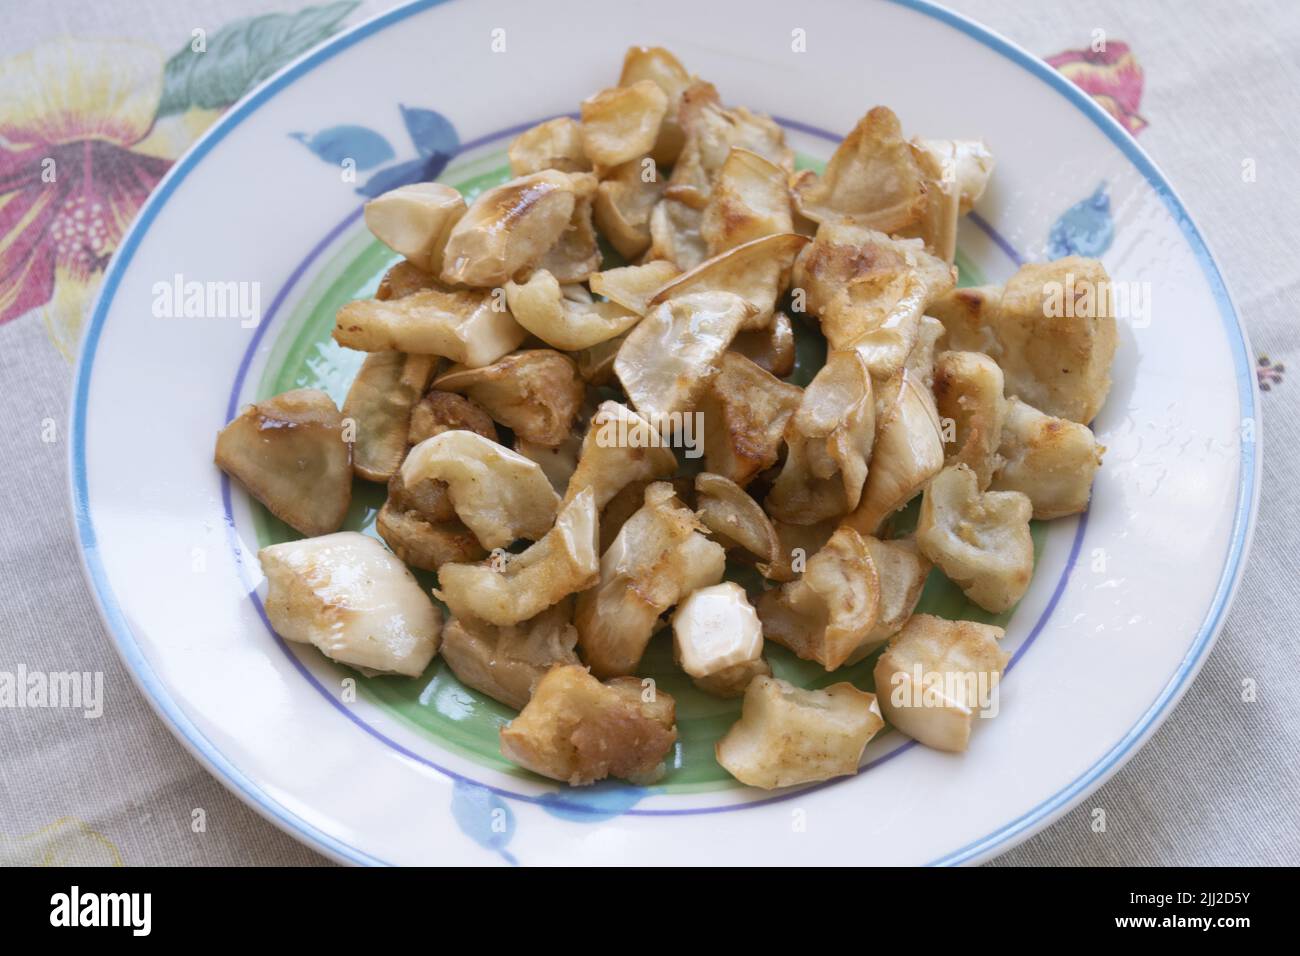 eggplant cut into cubes and fried Stock Photo